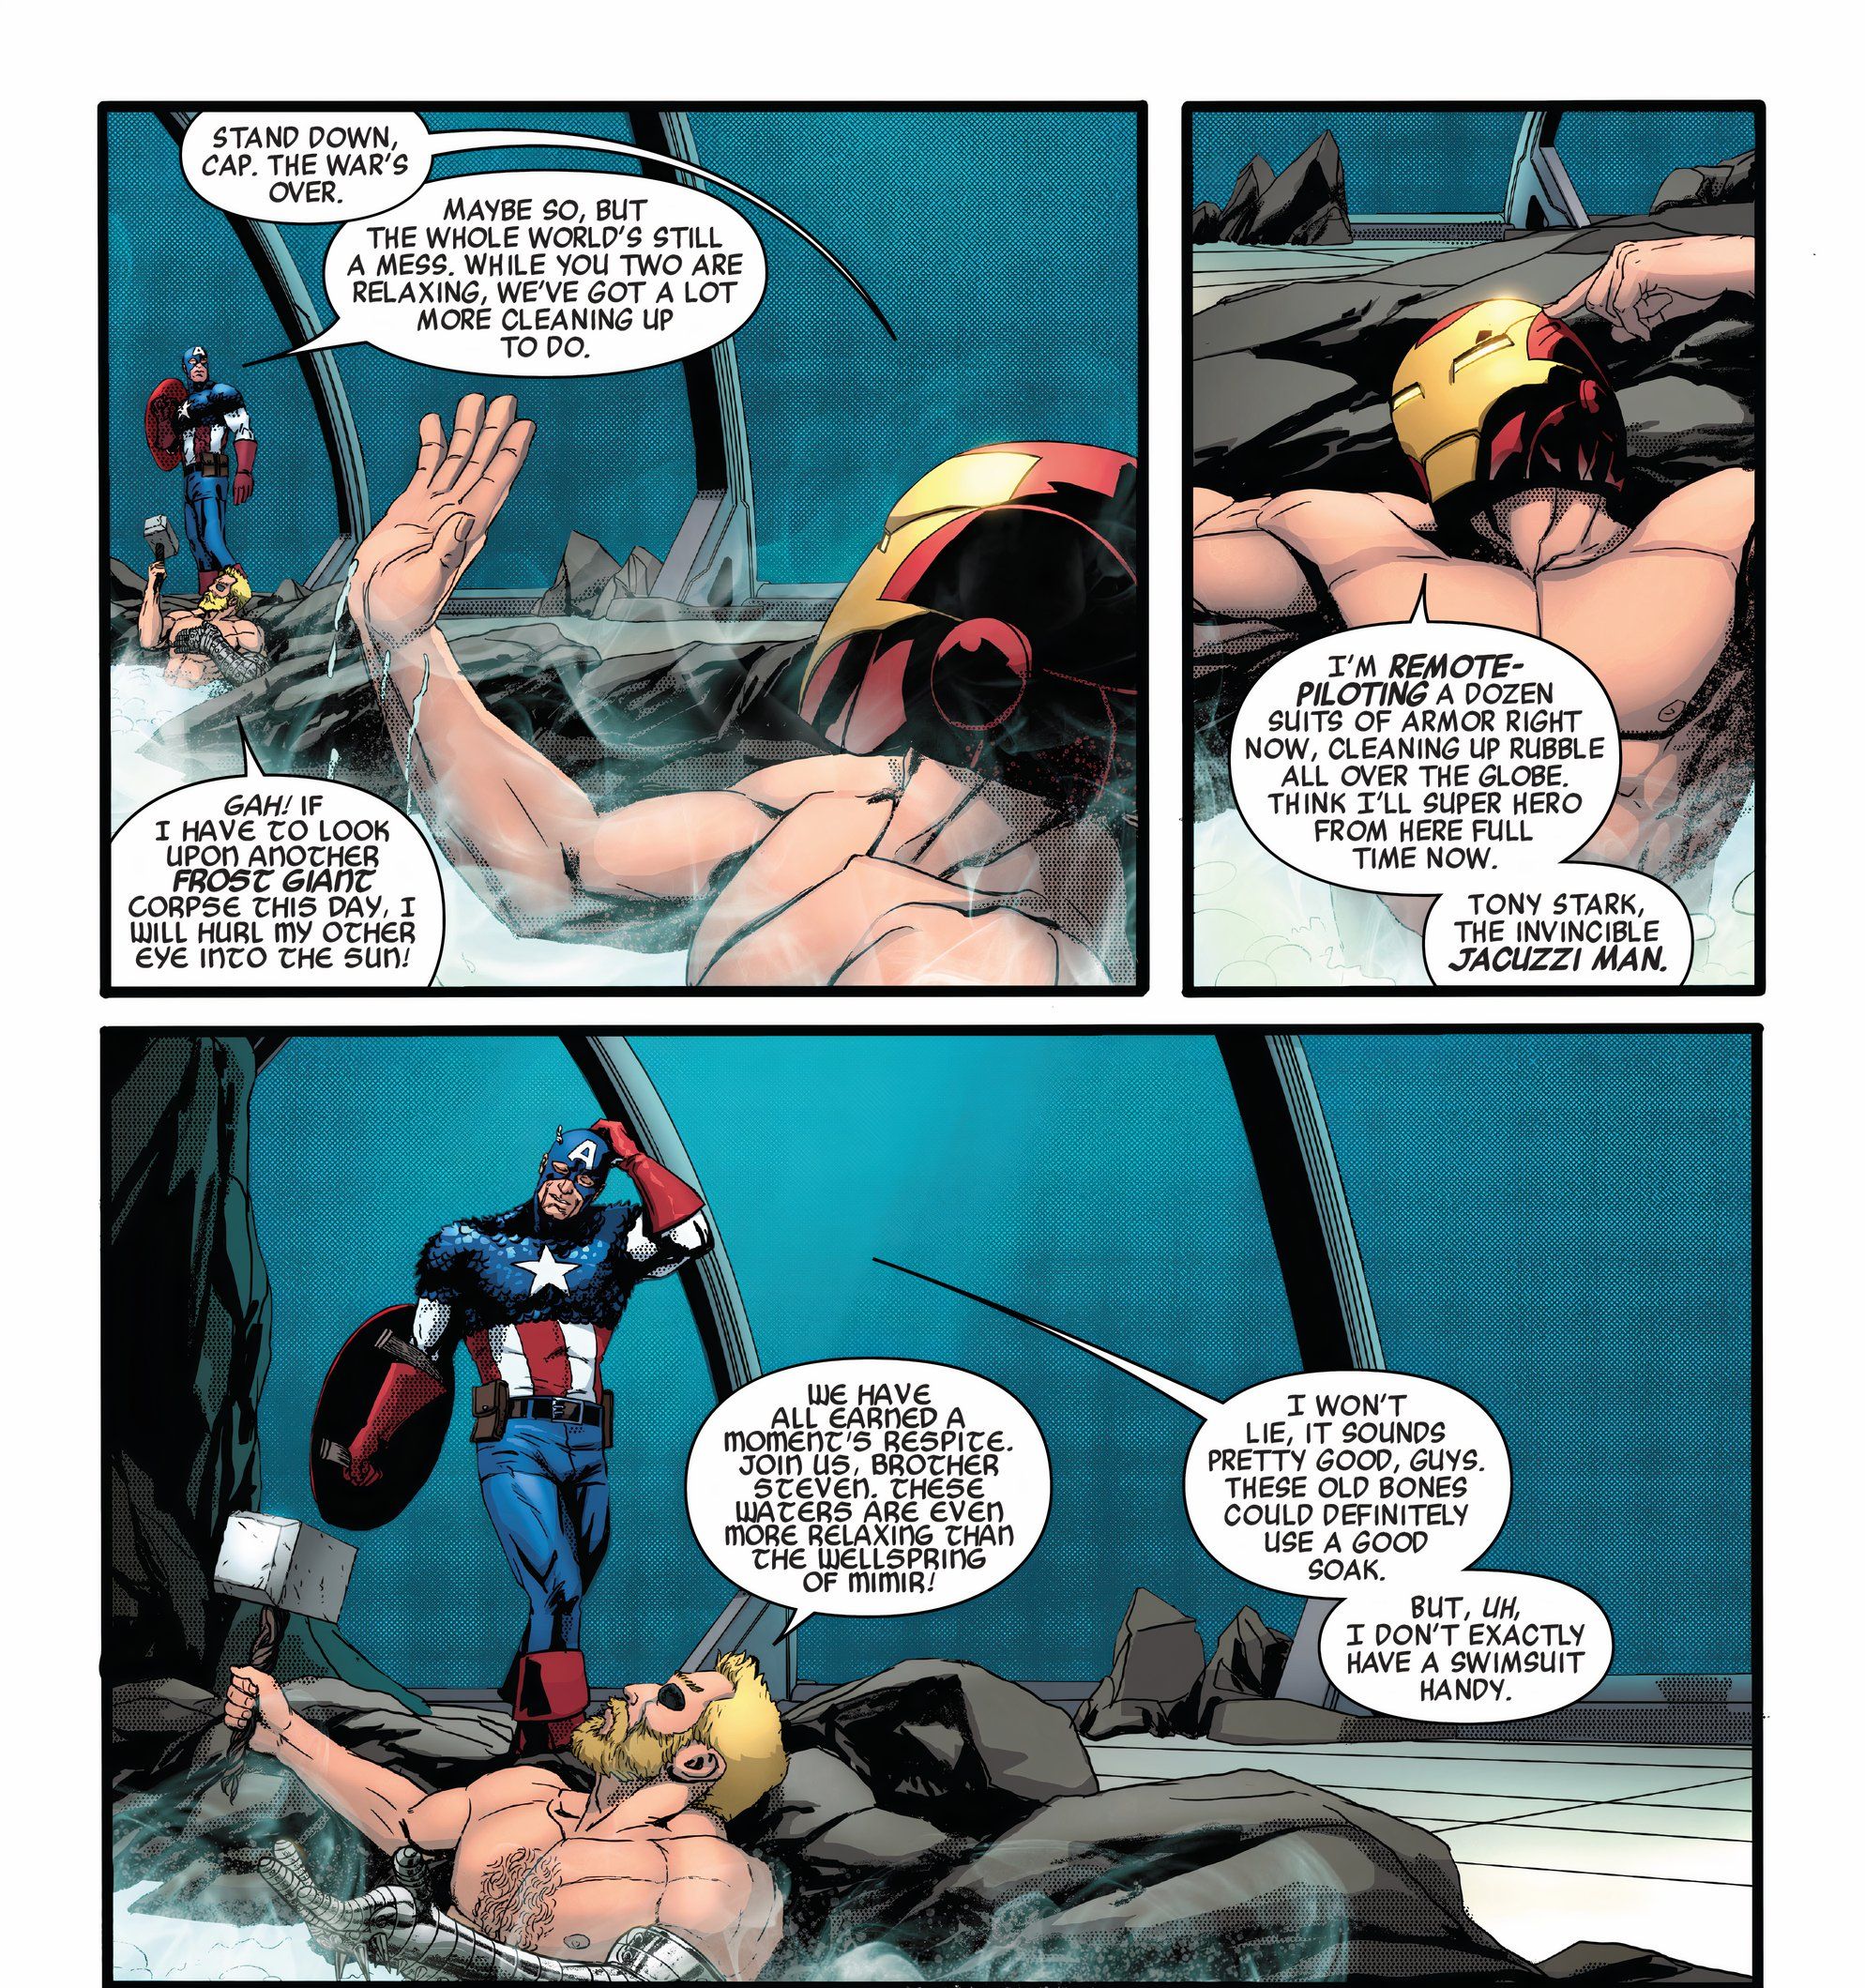 Captain America stands in his uniform and shield as Thor and Iron Man tempt him to get into a hot spring with them. 